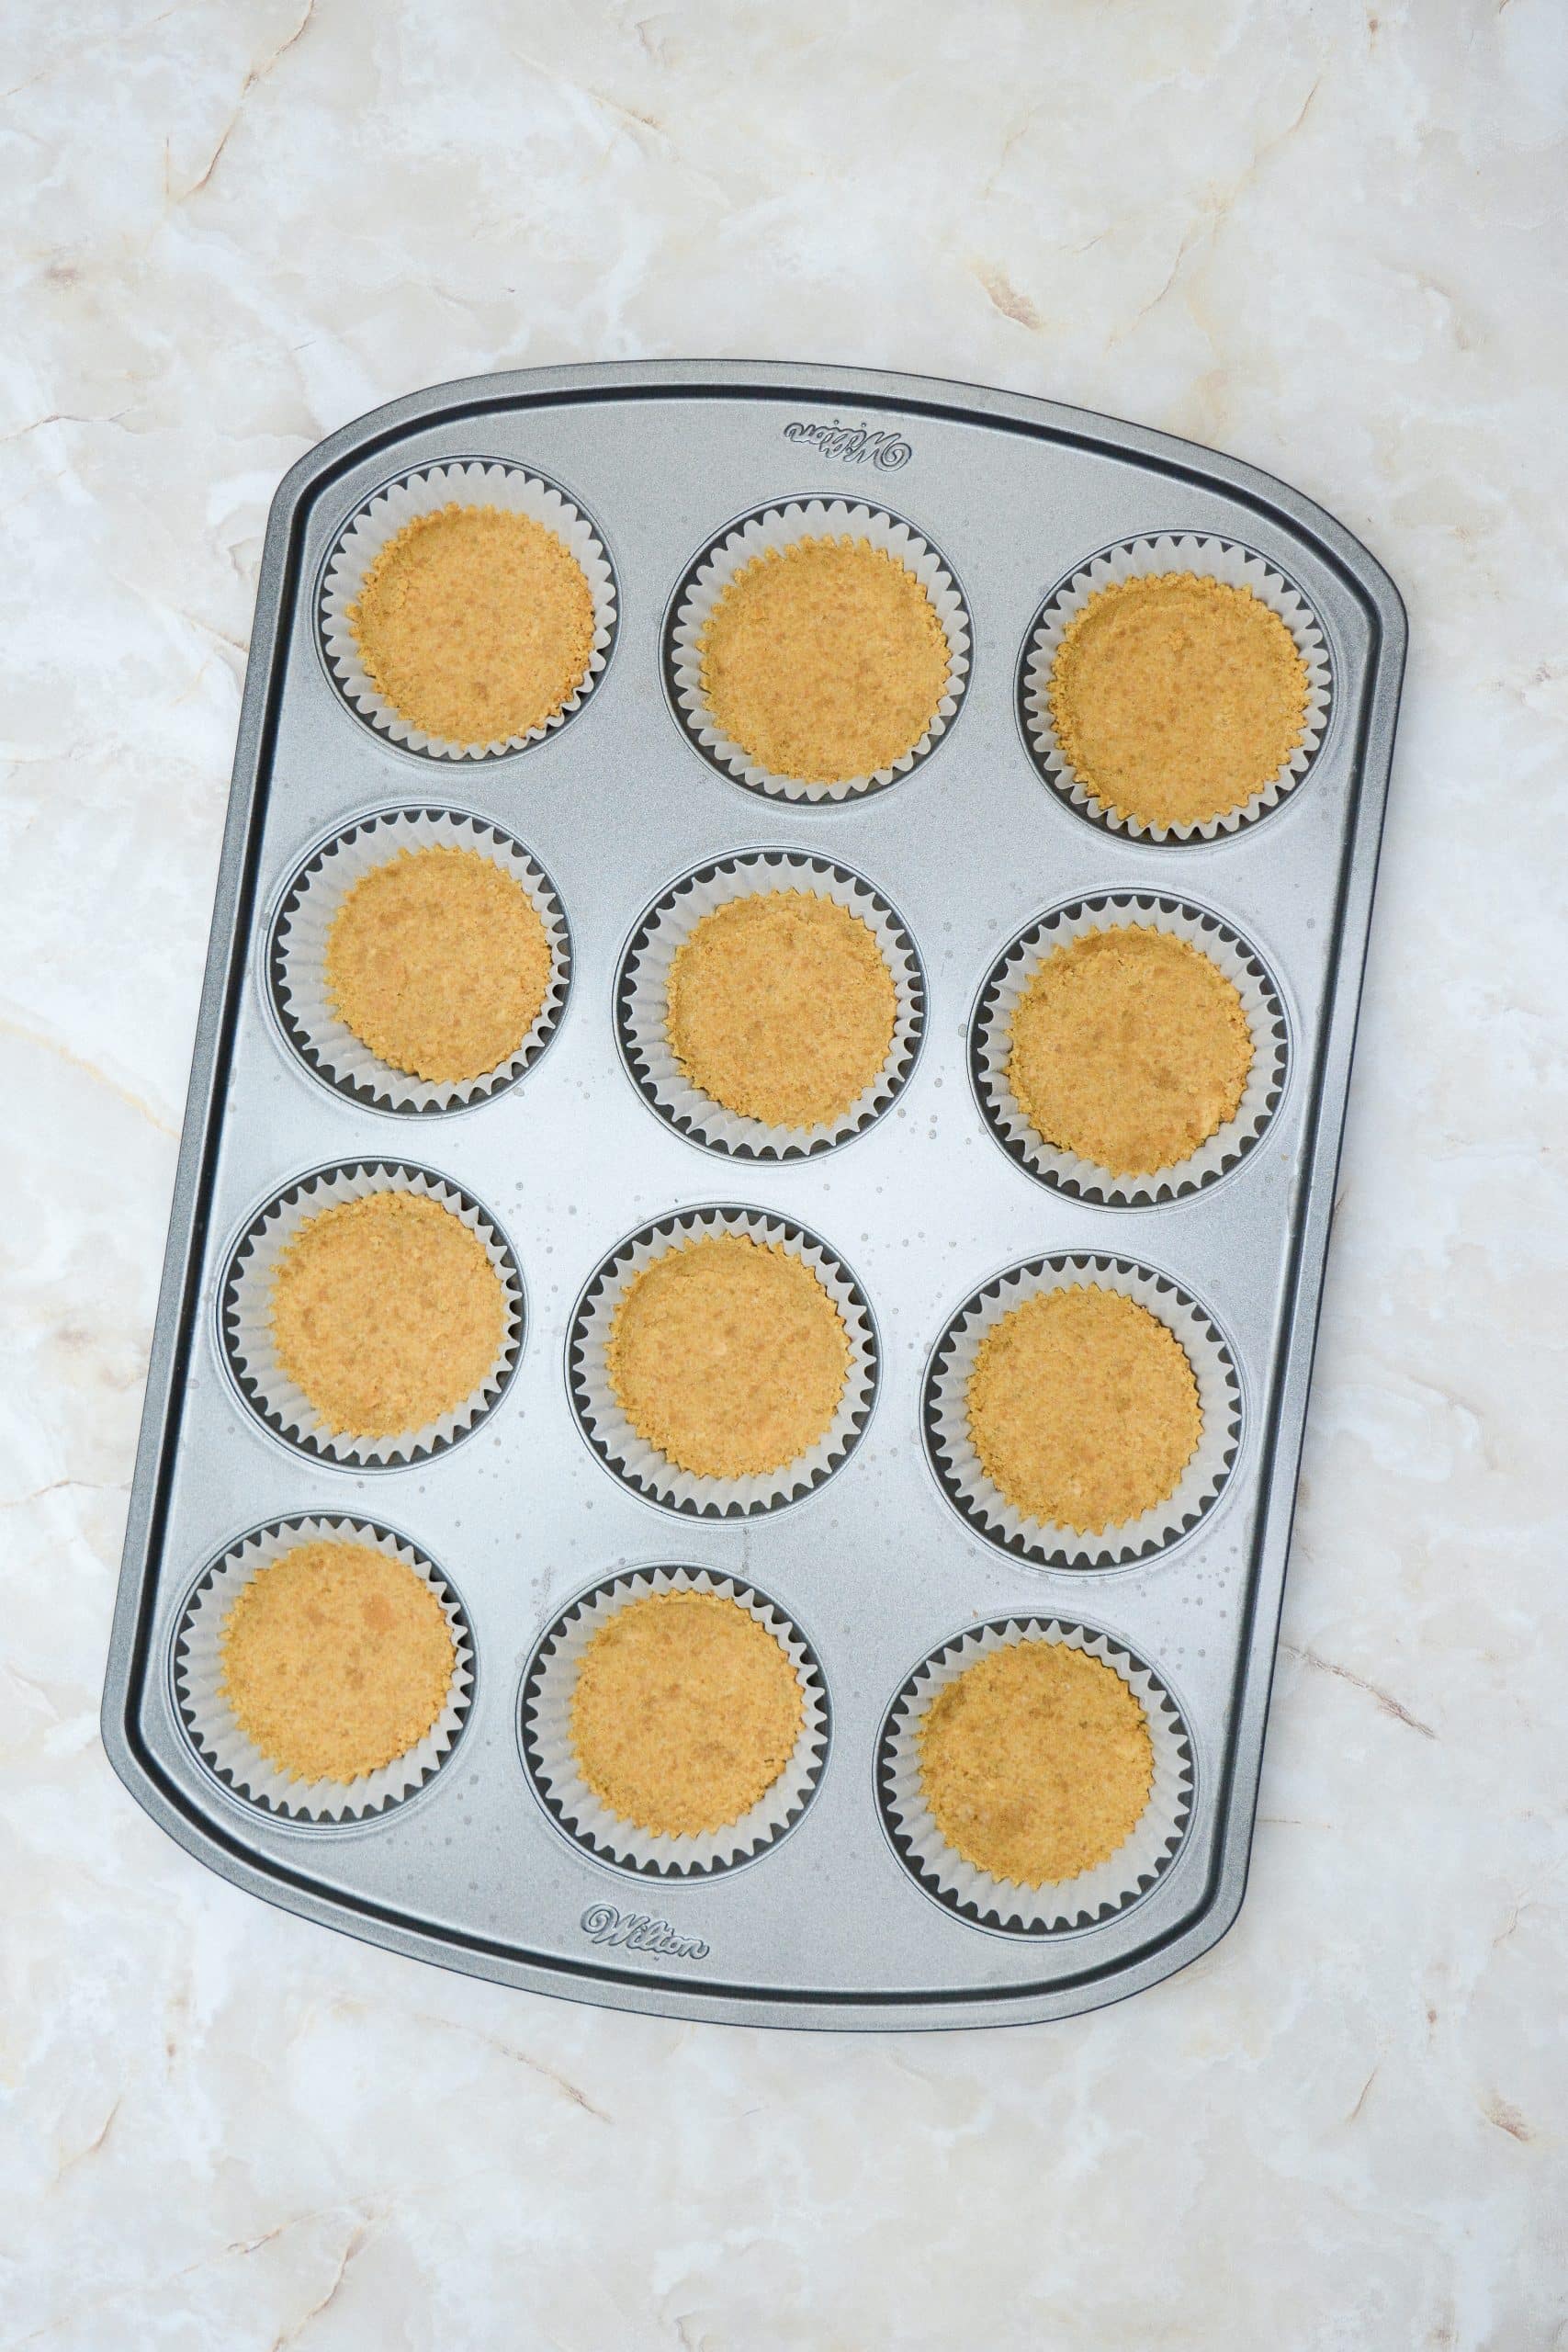 graham cracker crusts in cupcake liners in a muffin tin